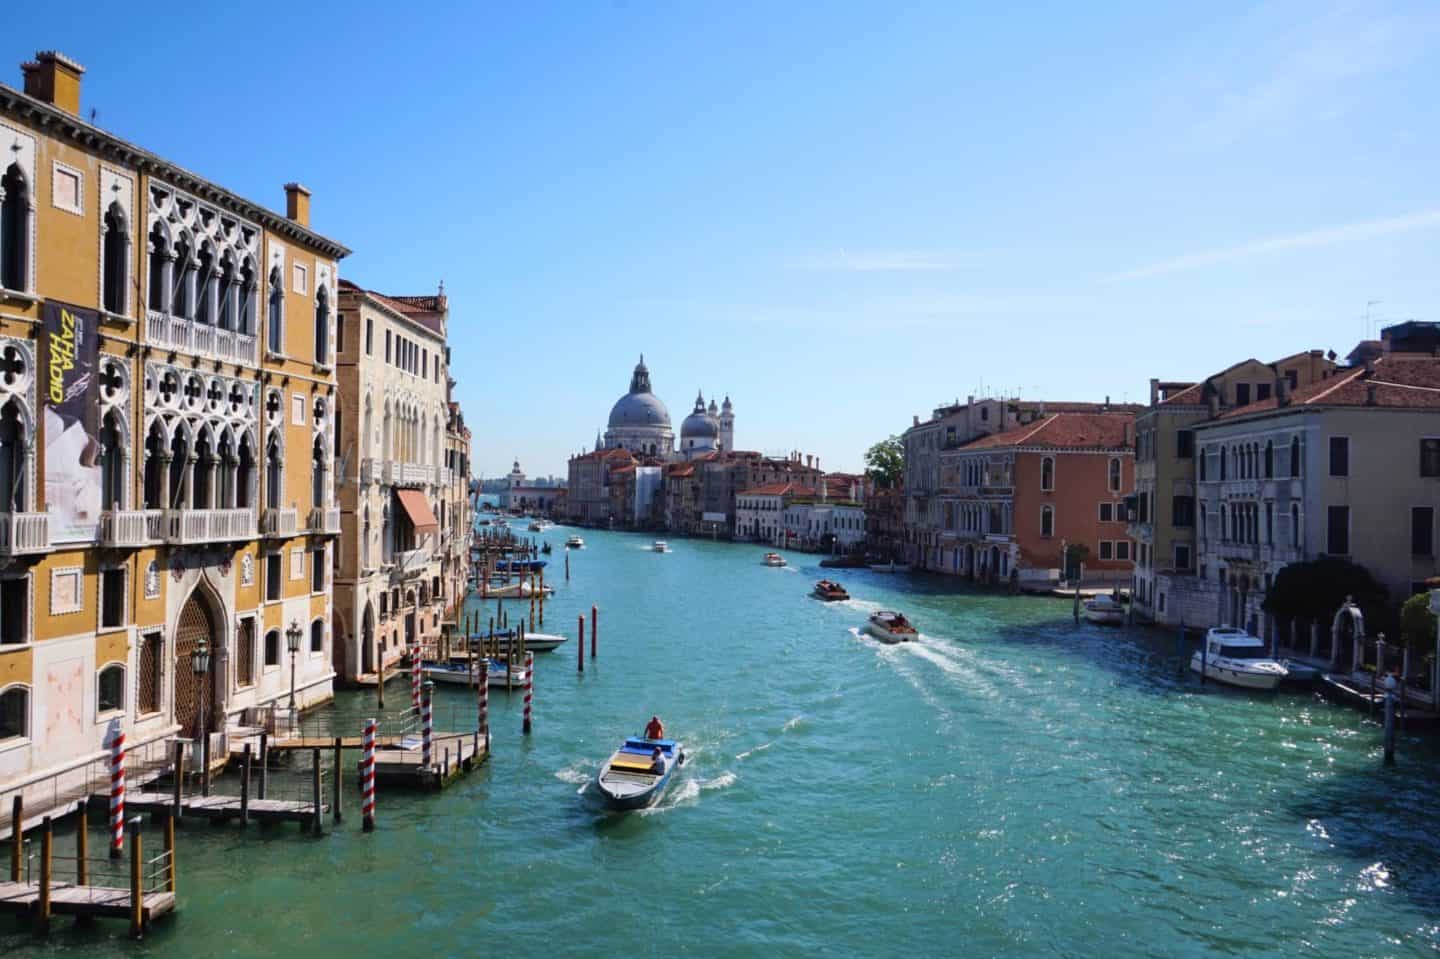 How to Avoid Crowds in Venice